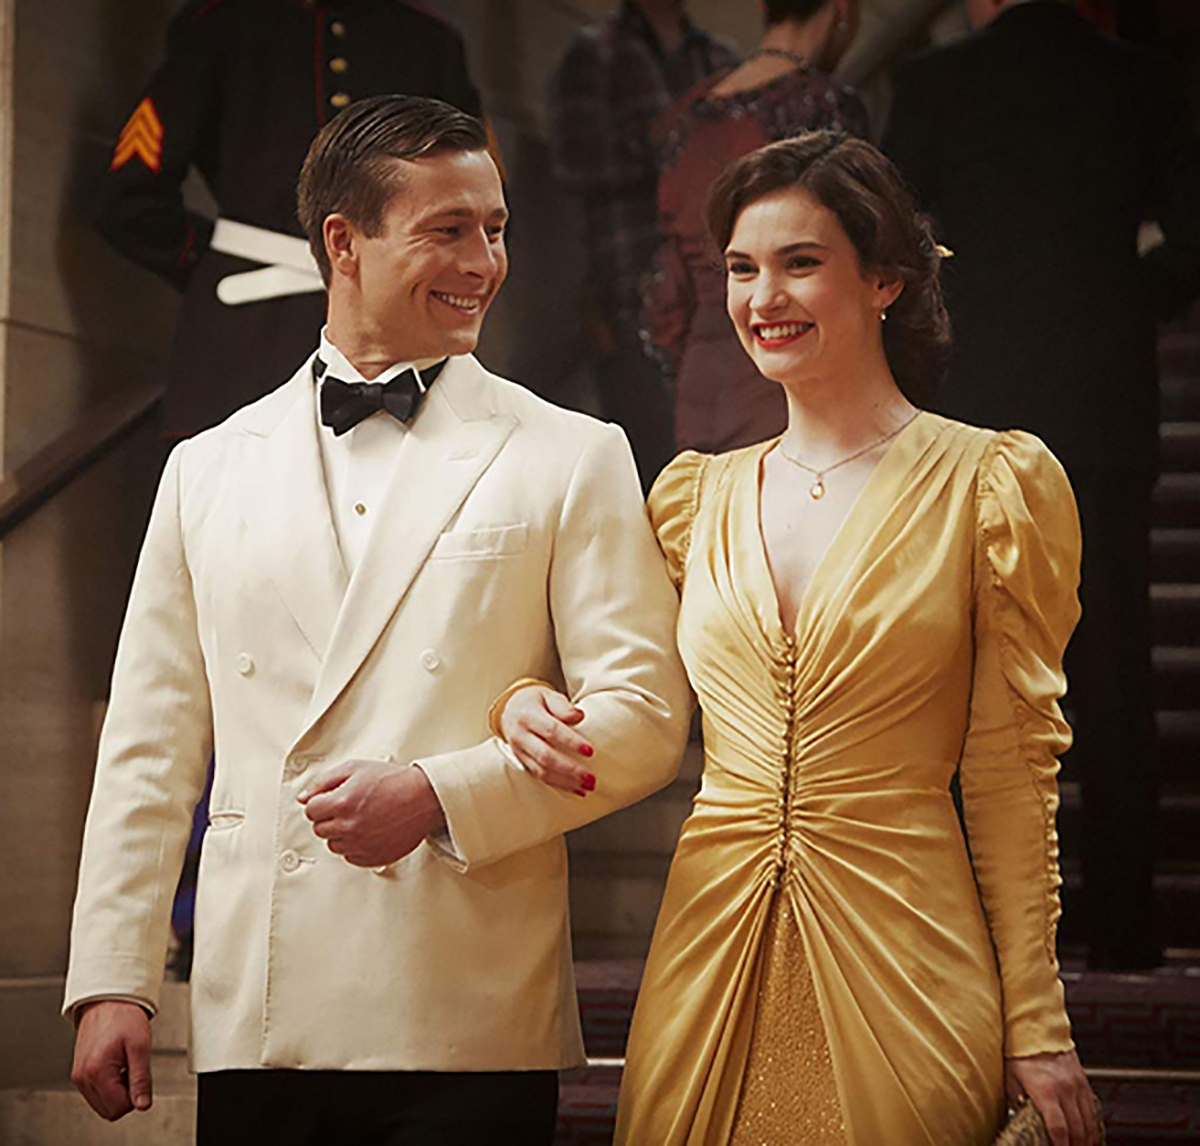 Glen Powell and Lily Games in The Guernsey Literary and Potato Peel Society, 2018